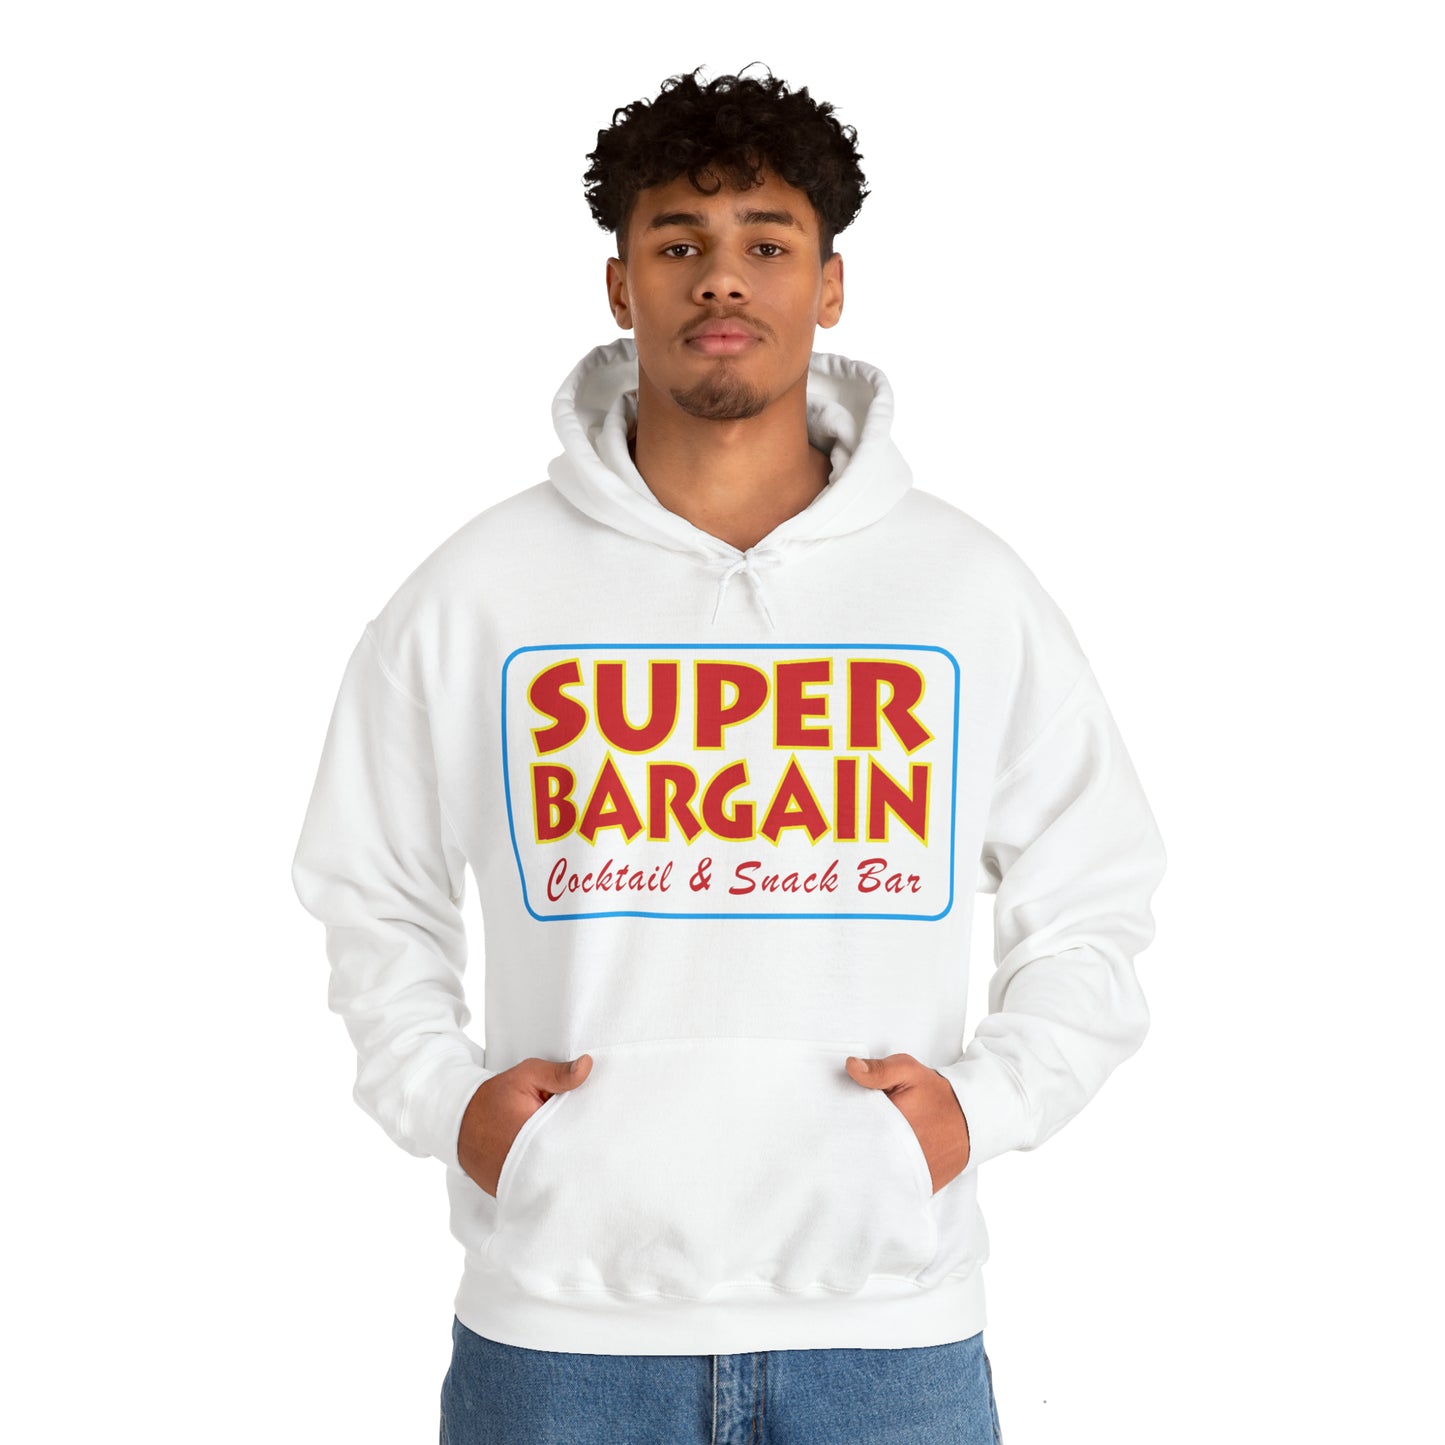 A young man wearing a white Unisex Heavy Blend™ Hooded Sweatshirt with "SUPER BARGAIN Cocktail & Snack Bar" printed on the front, standing against a plain background in Cabbagetown, Toronto.